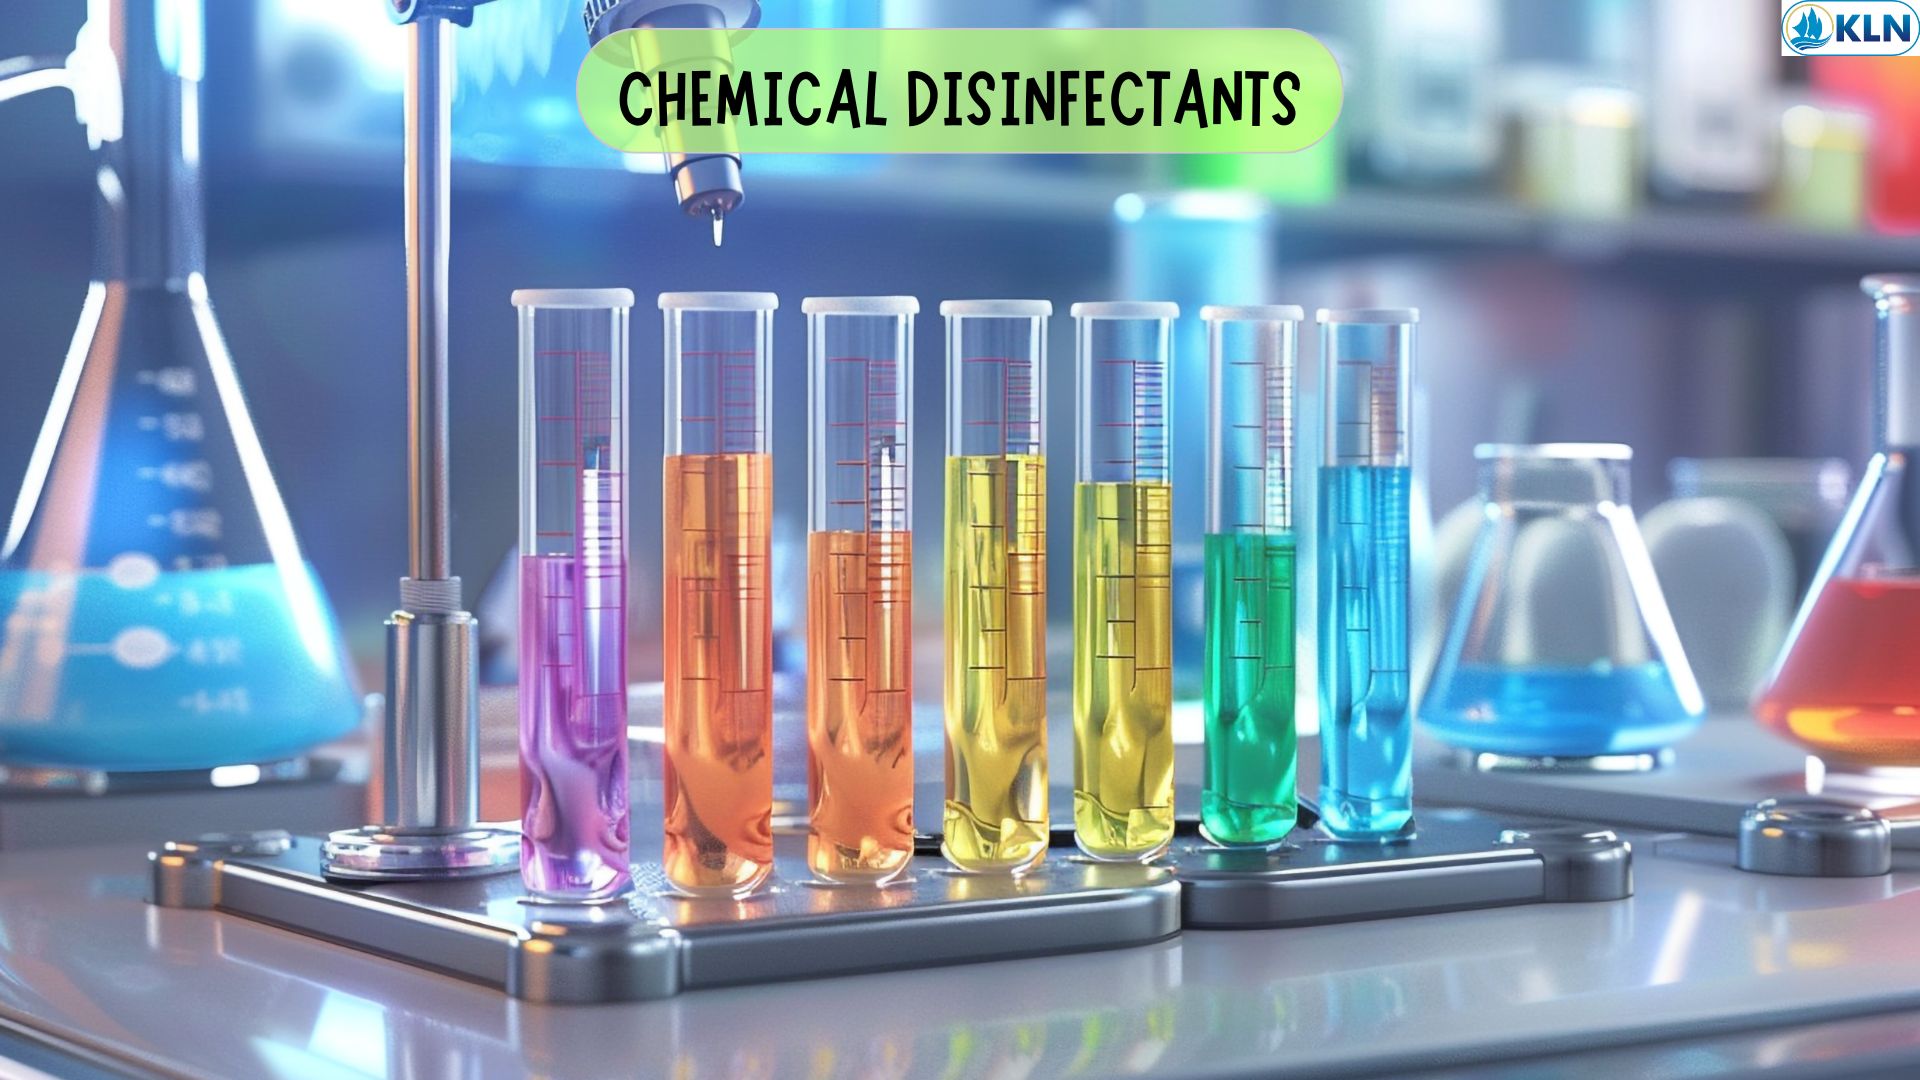 CHEMICAL DISINFECTANTS